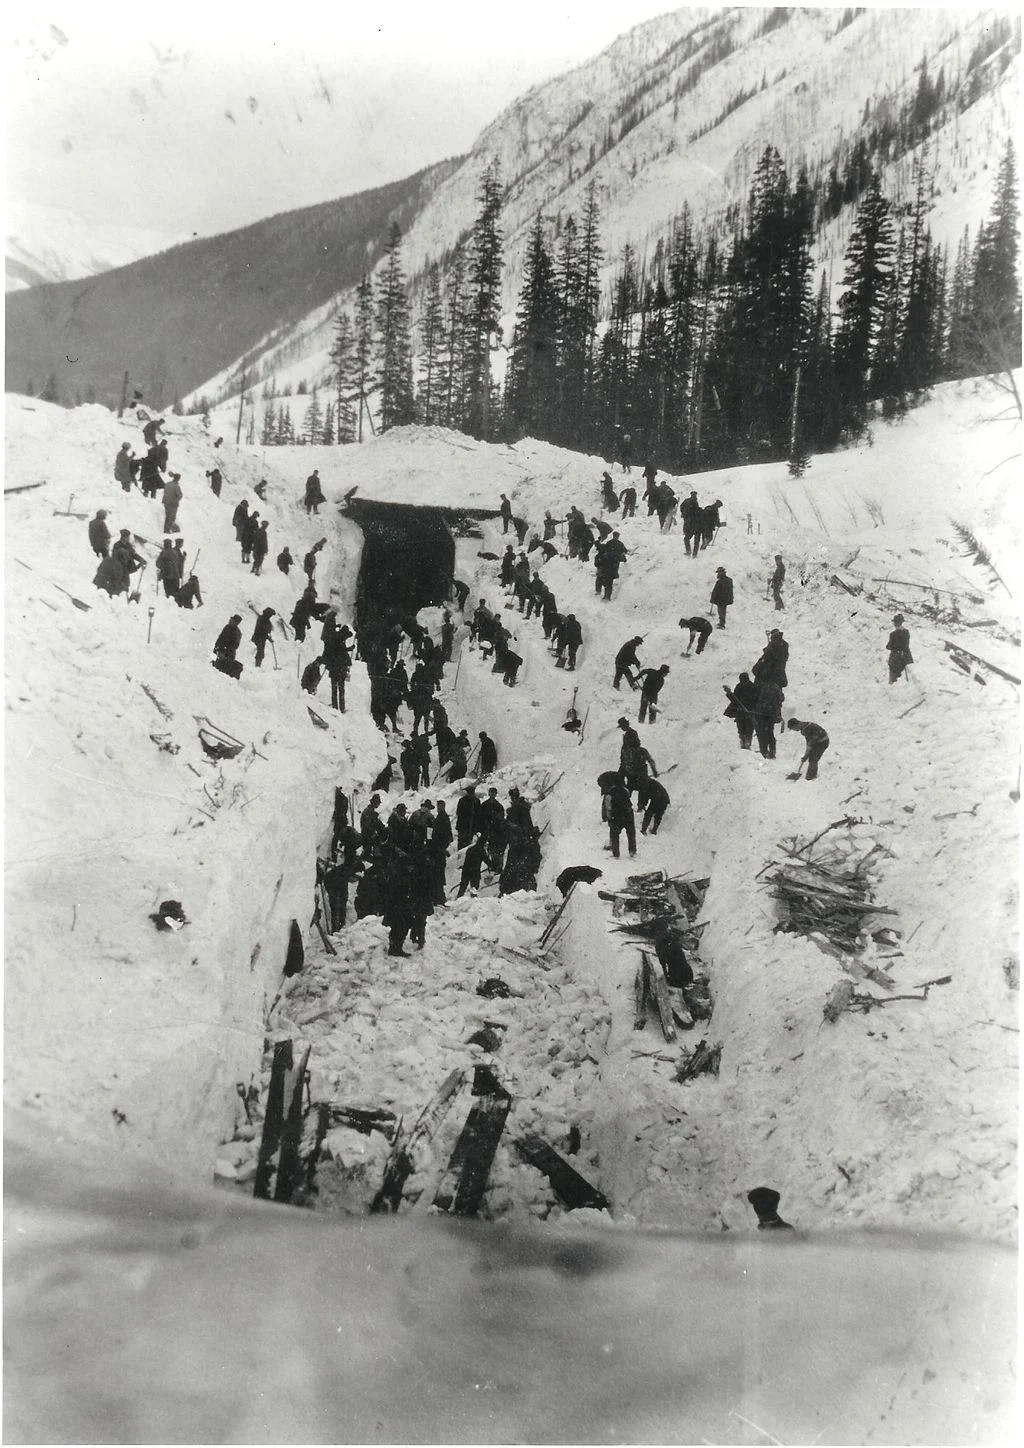 Rogers Pass avalanche disaster 5 March 1910